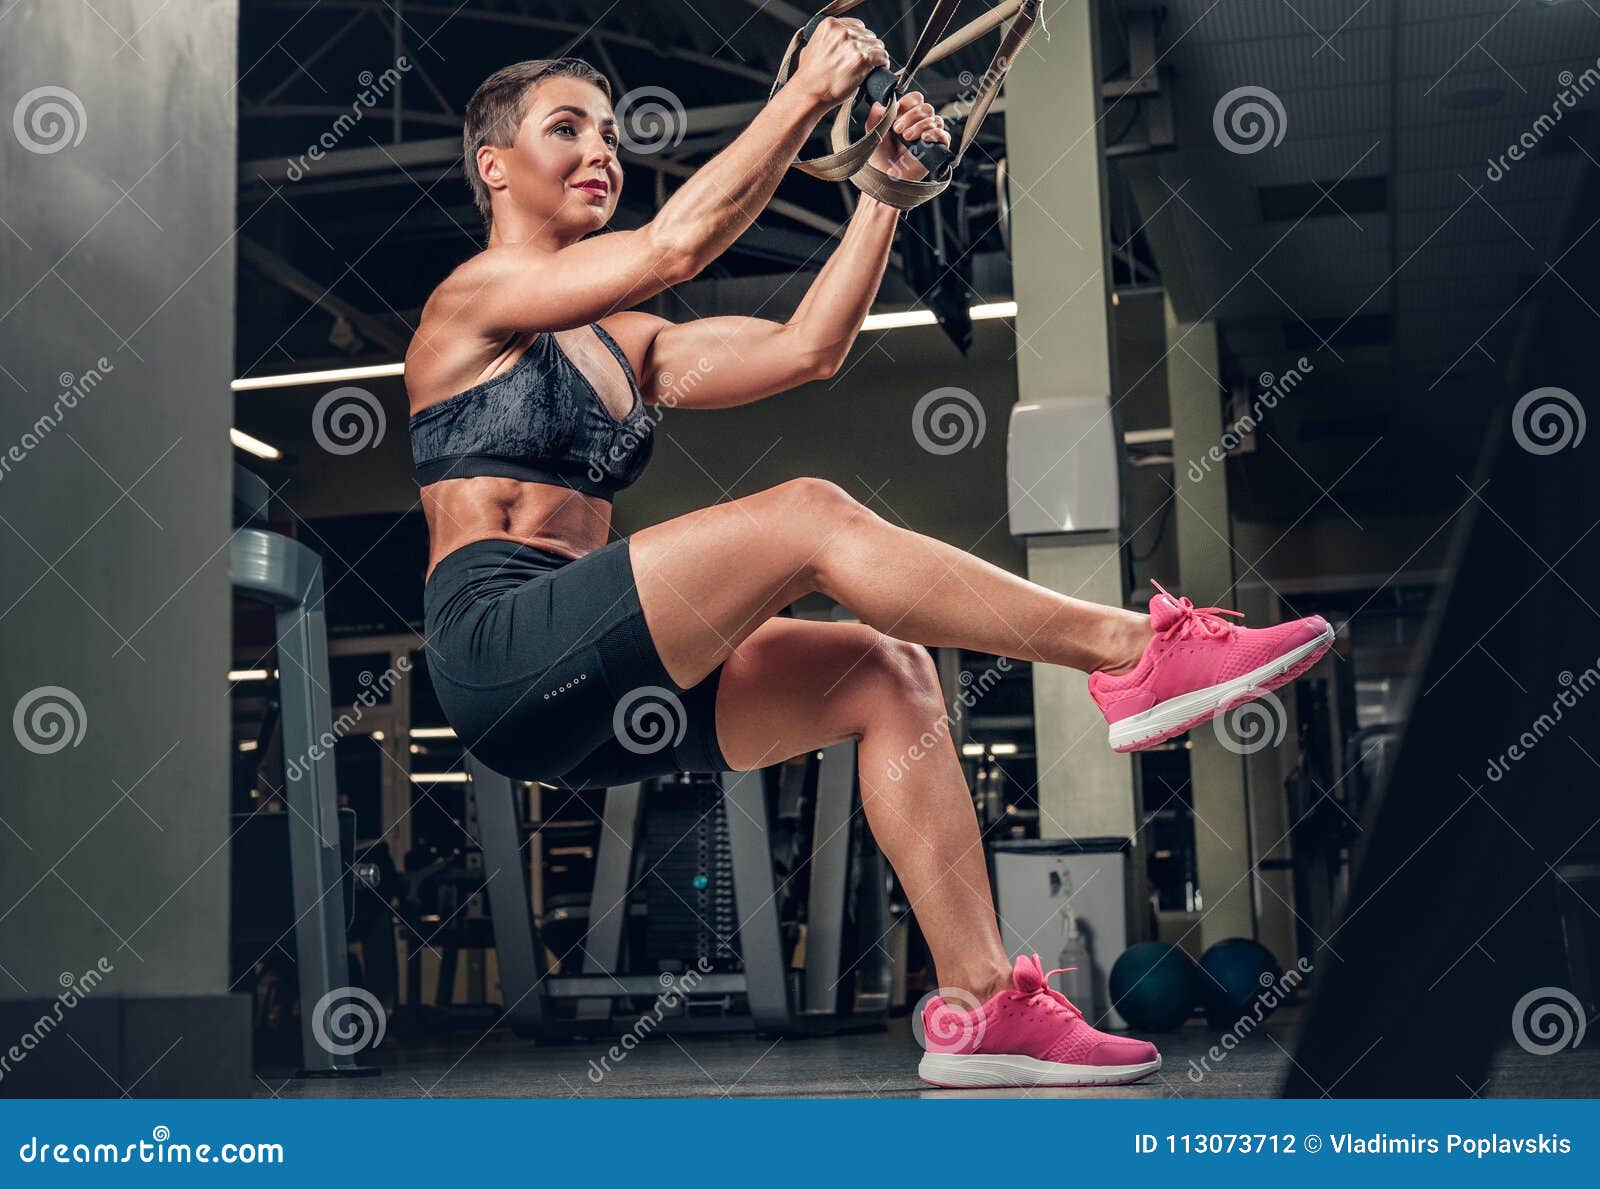 Female Doing Workouts With Trx Suspension Strips In A Gym Club Stock